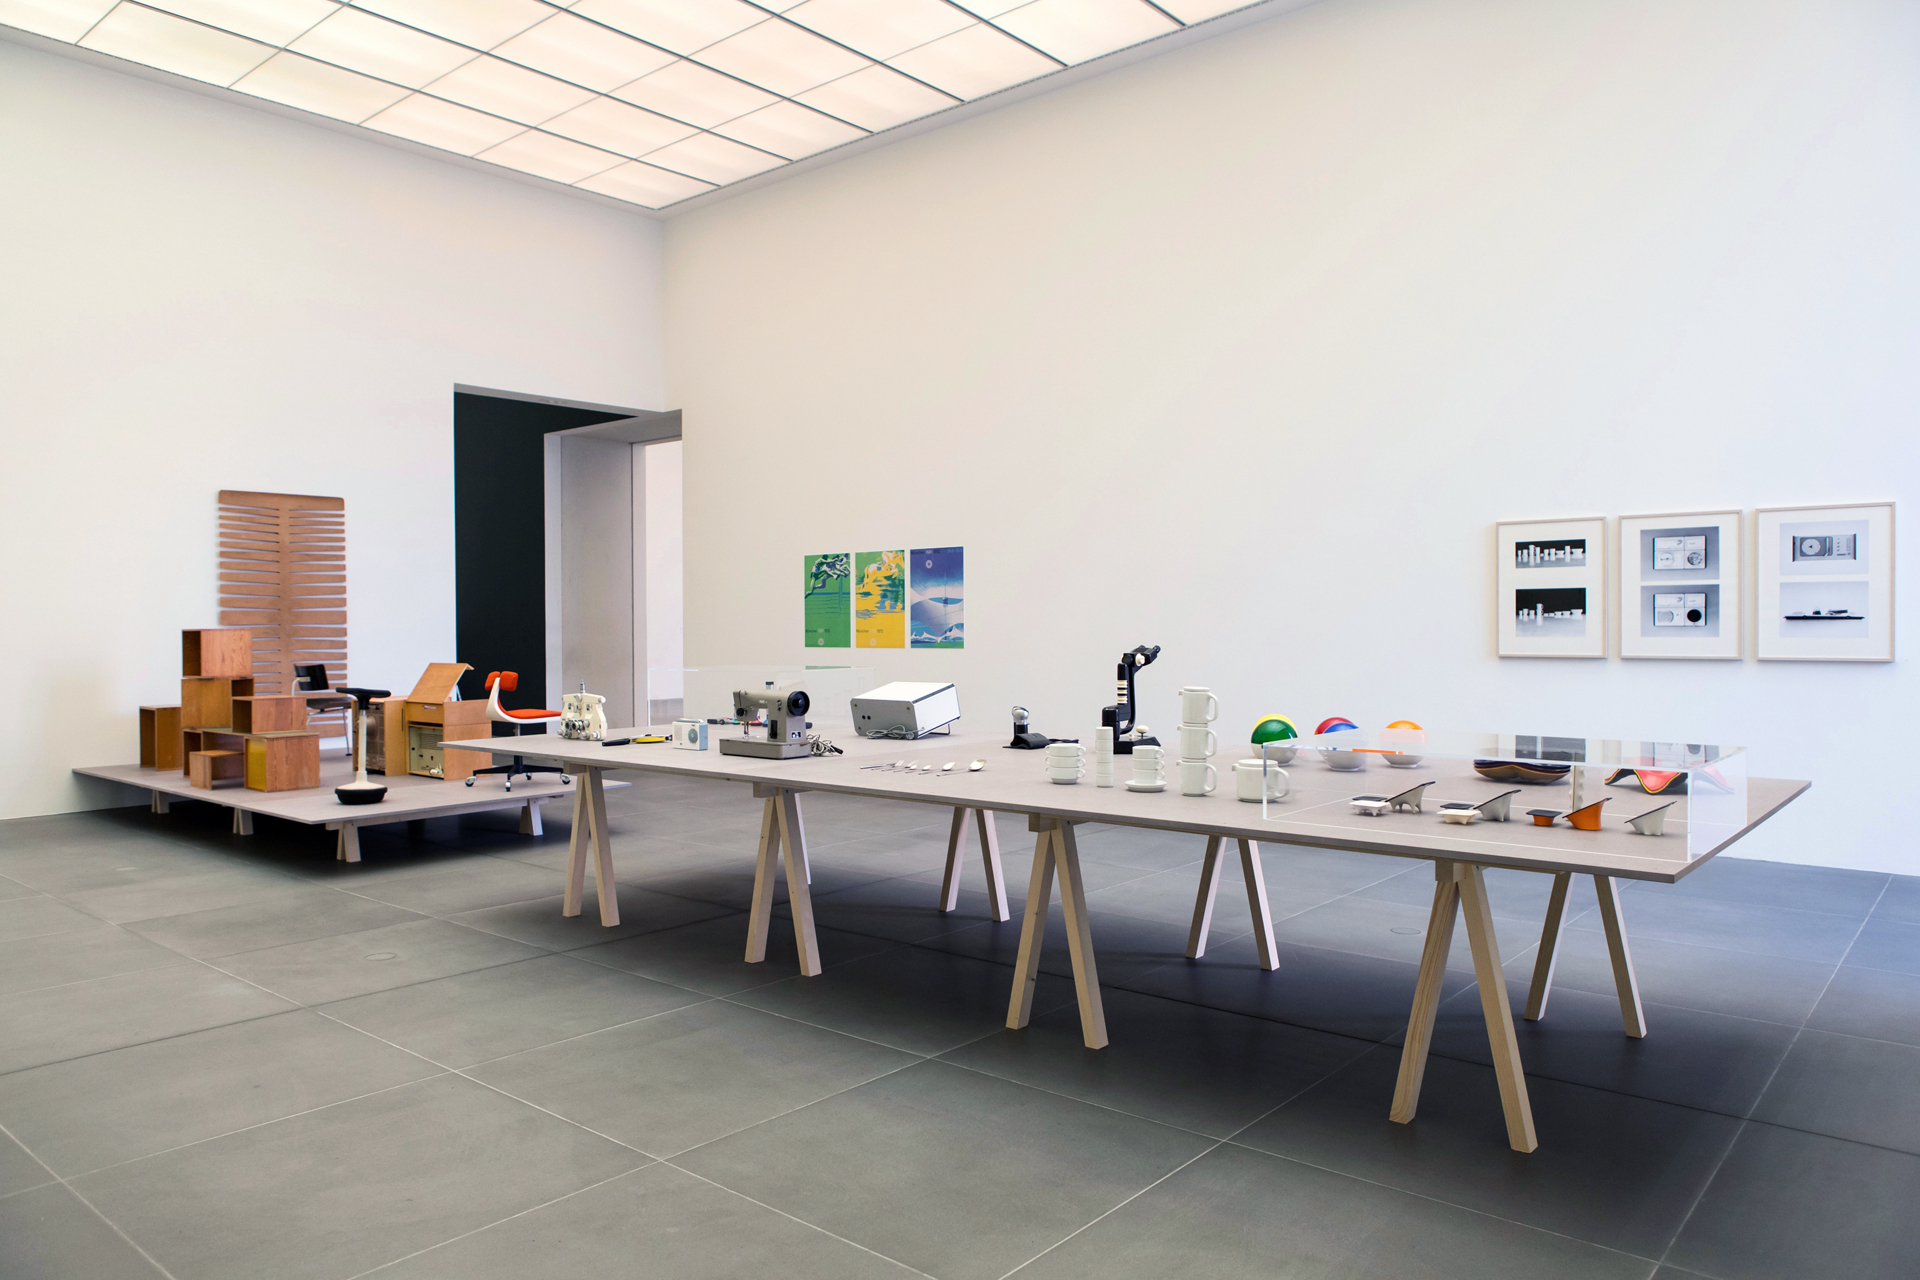 Examples of Graphic and Furniture Design of the Ulm School of Design